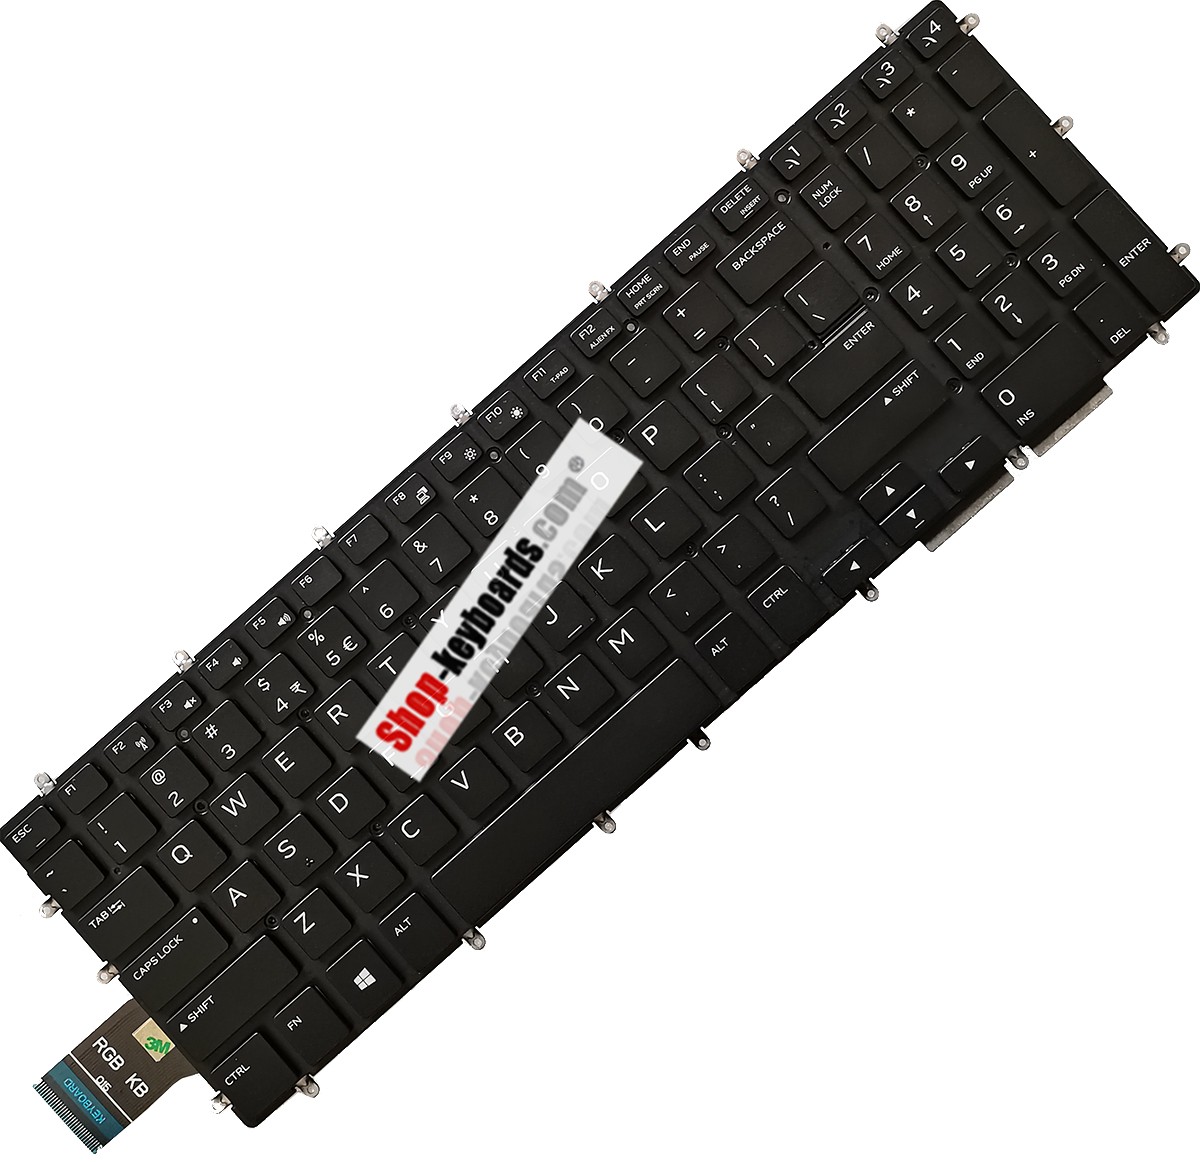 Dell ALW15M-D2737R Keyboard replacement